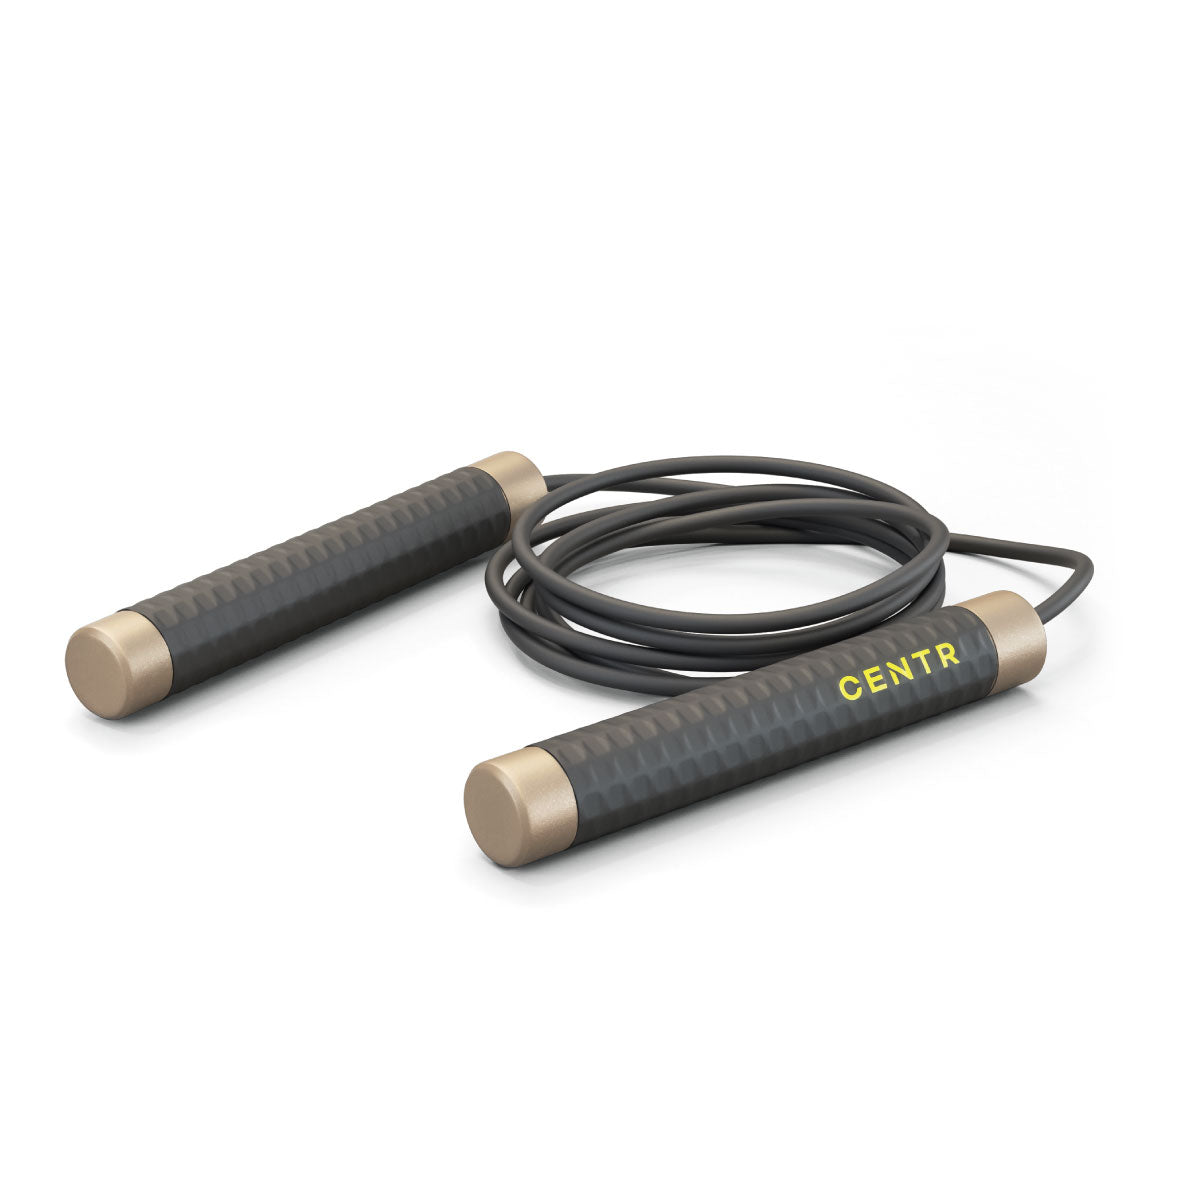 Training Jump Rope - Durable and Lightweight - Centr